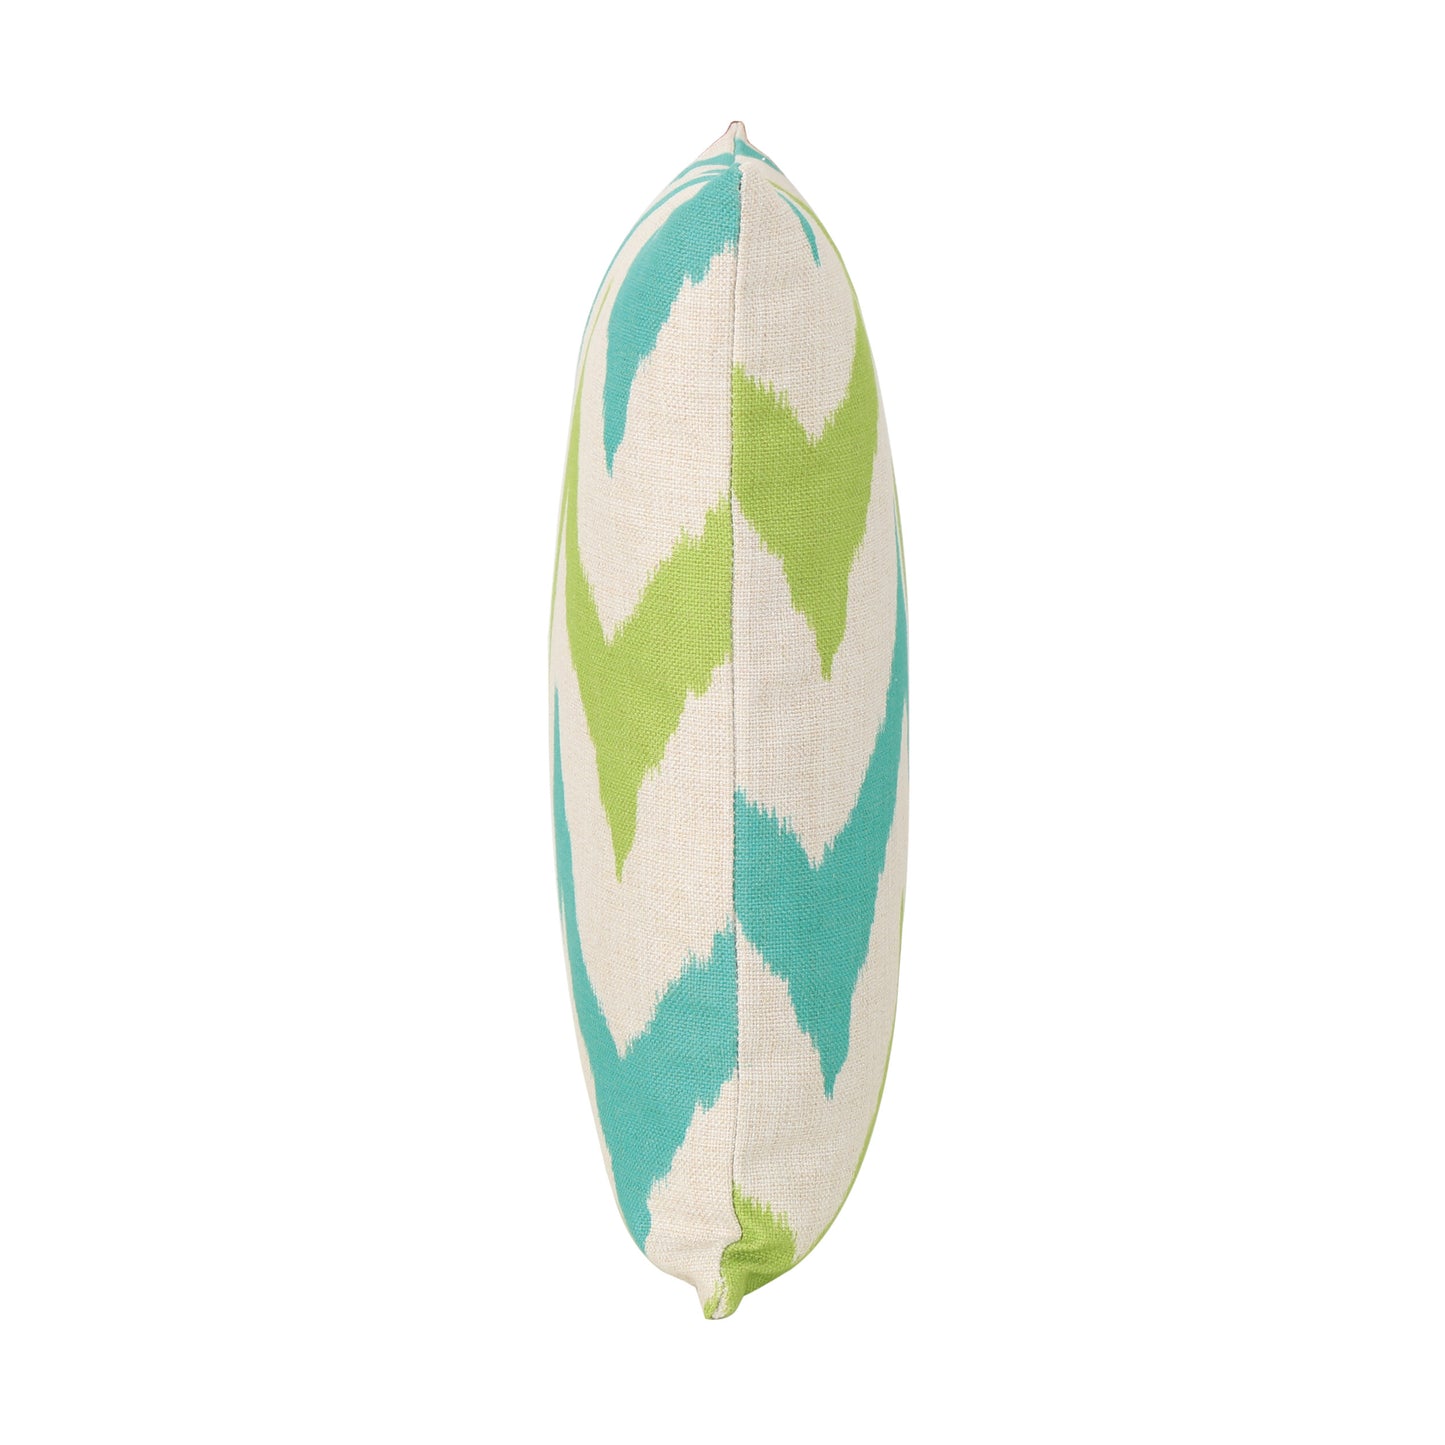 Zora Outdoor 18-inch Water Resistant Square Pillows, Teal and Green